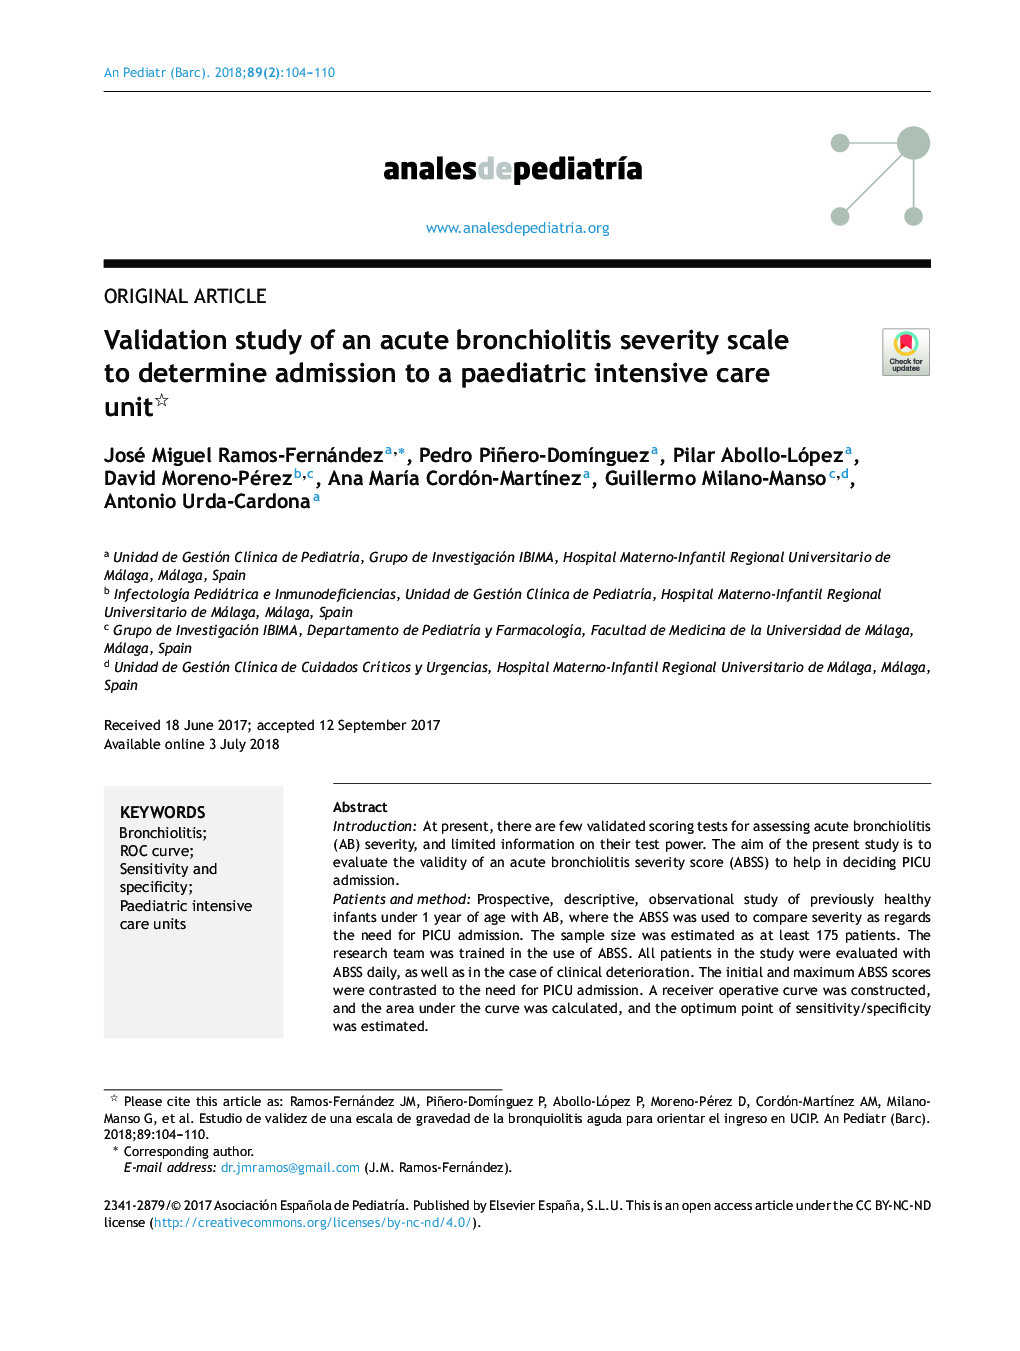 Validation study of an acute bronchiolitis severity scale to determine admission to a paediatric intensive care unit